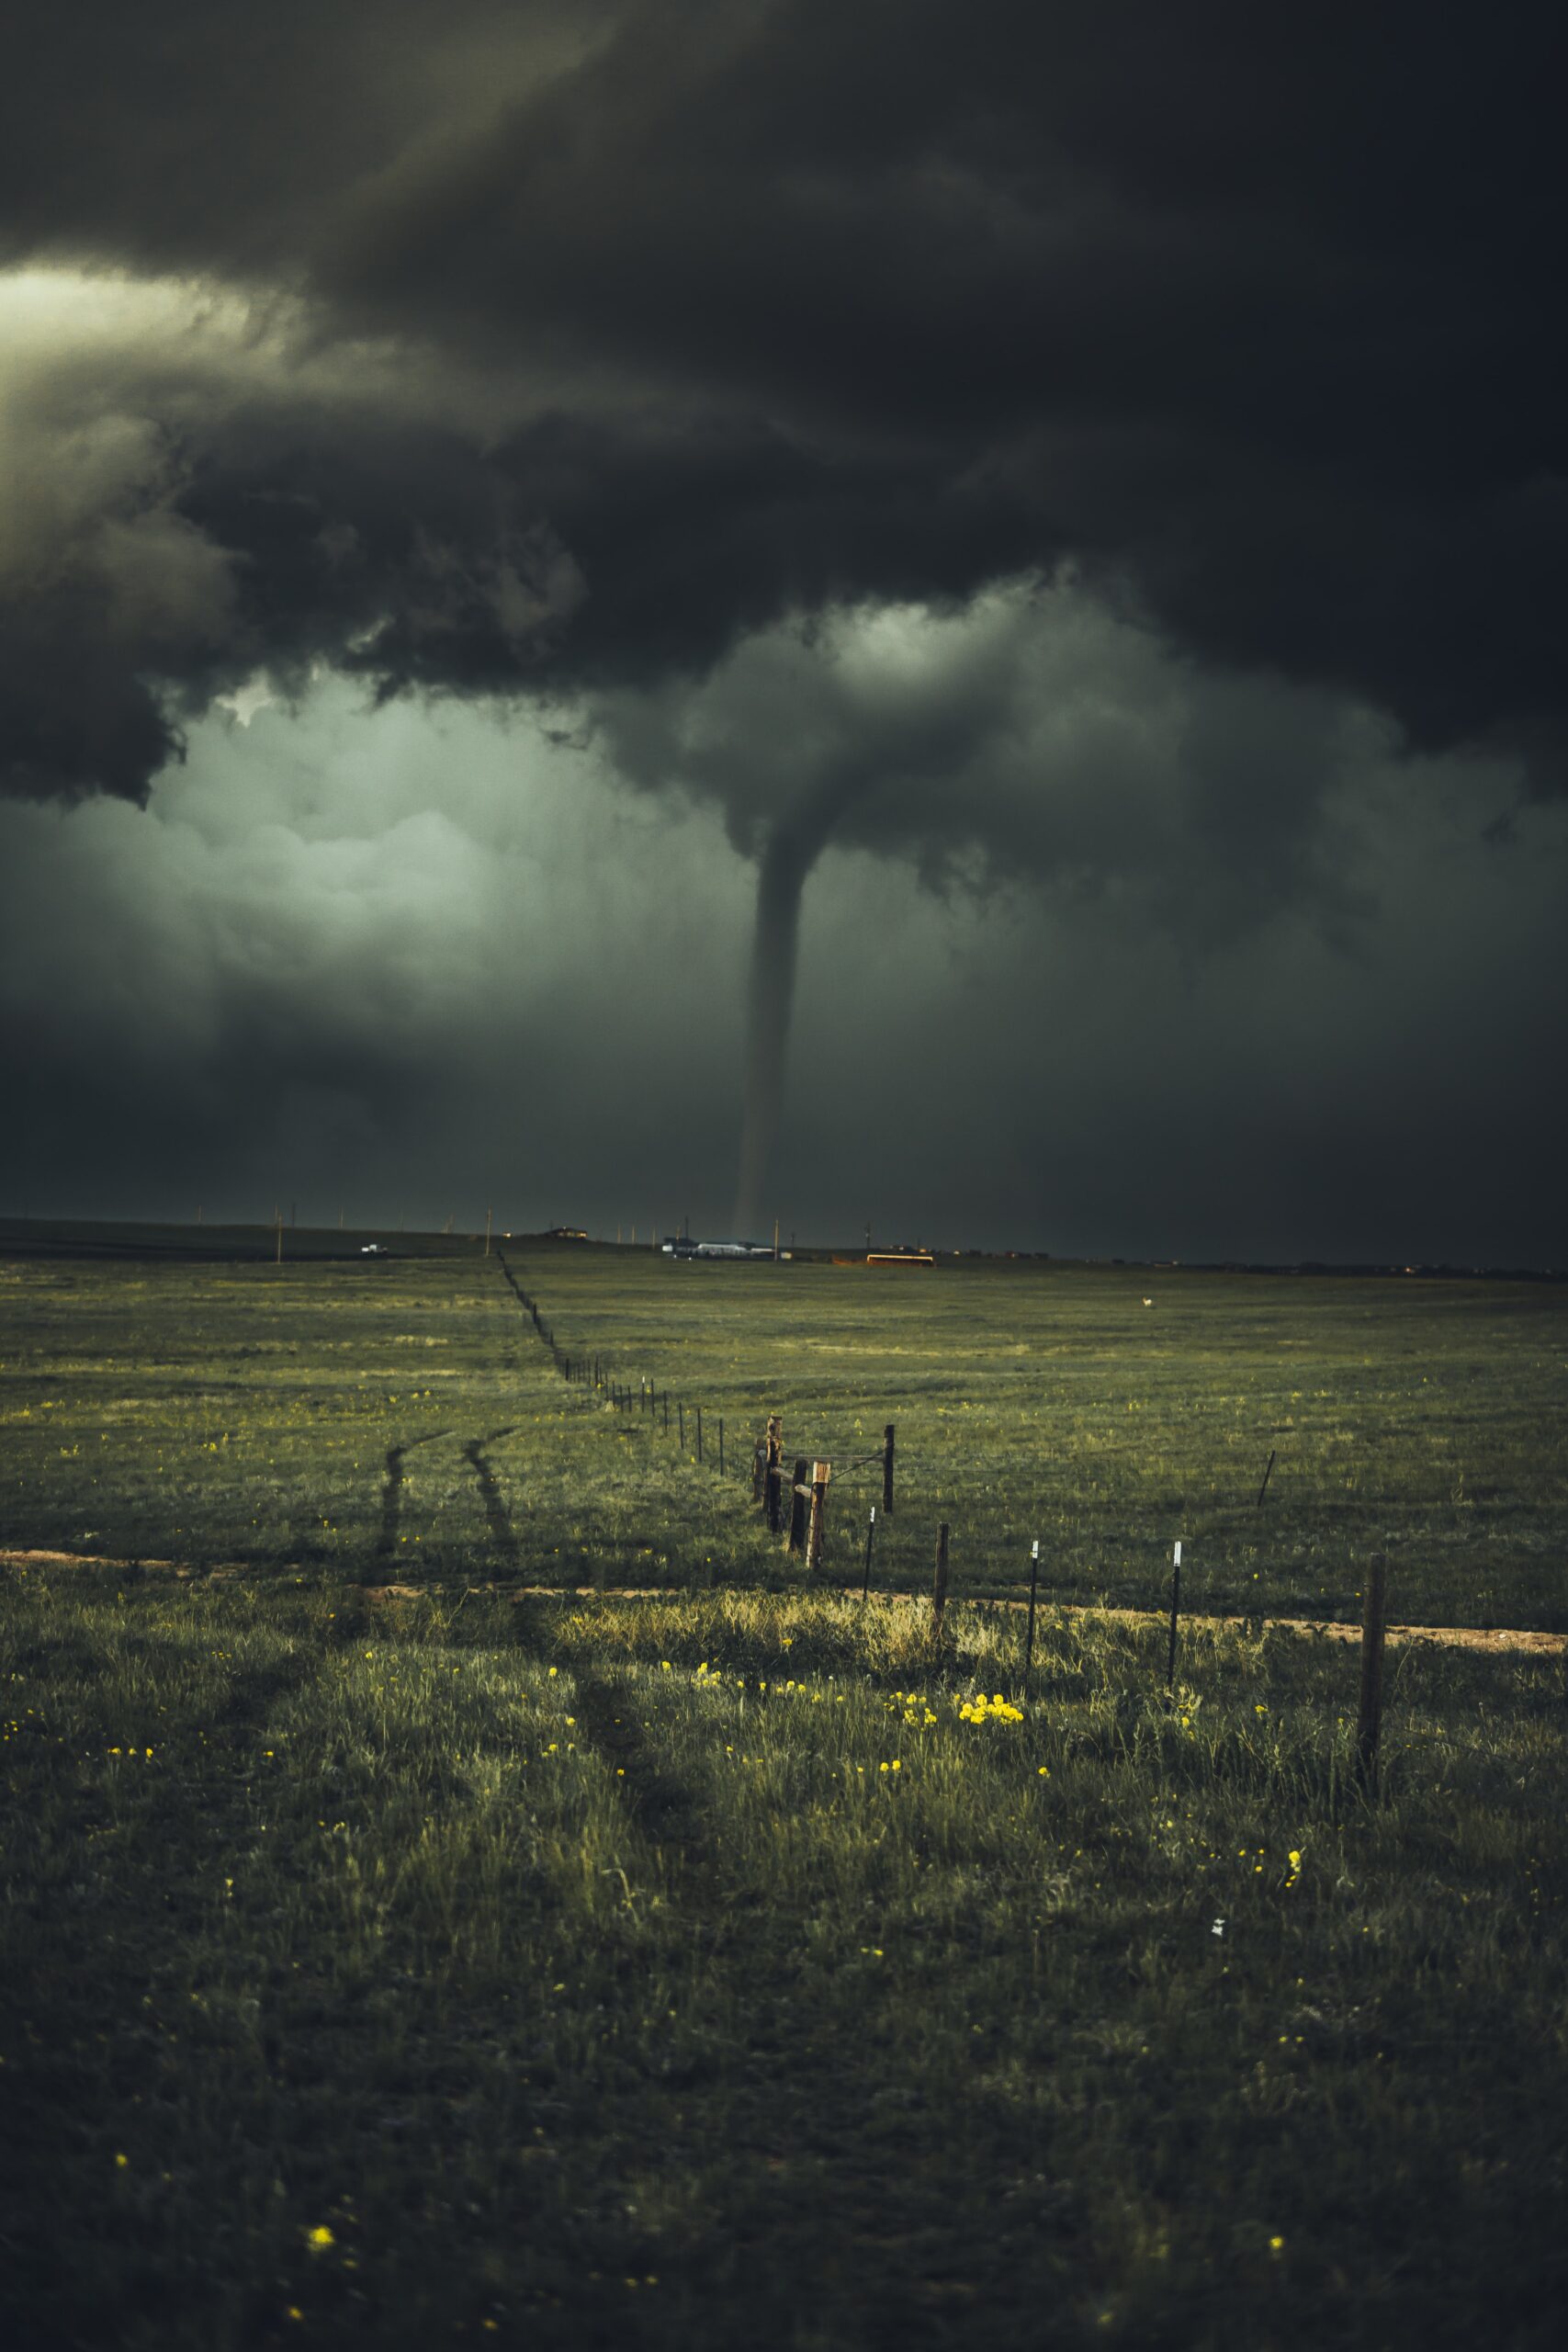 A stormy sky with a tornado forming in a large field